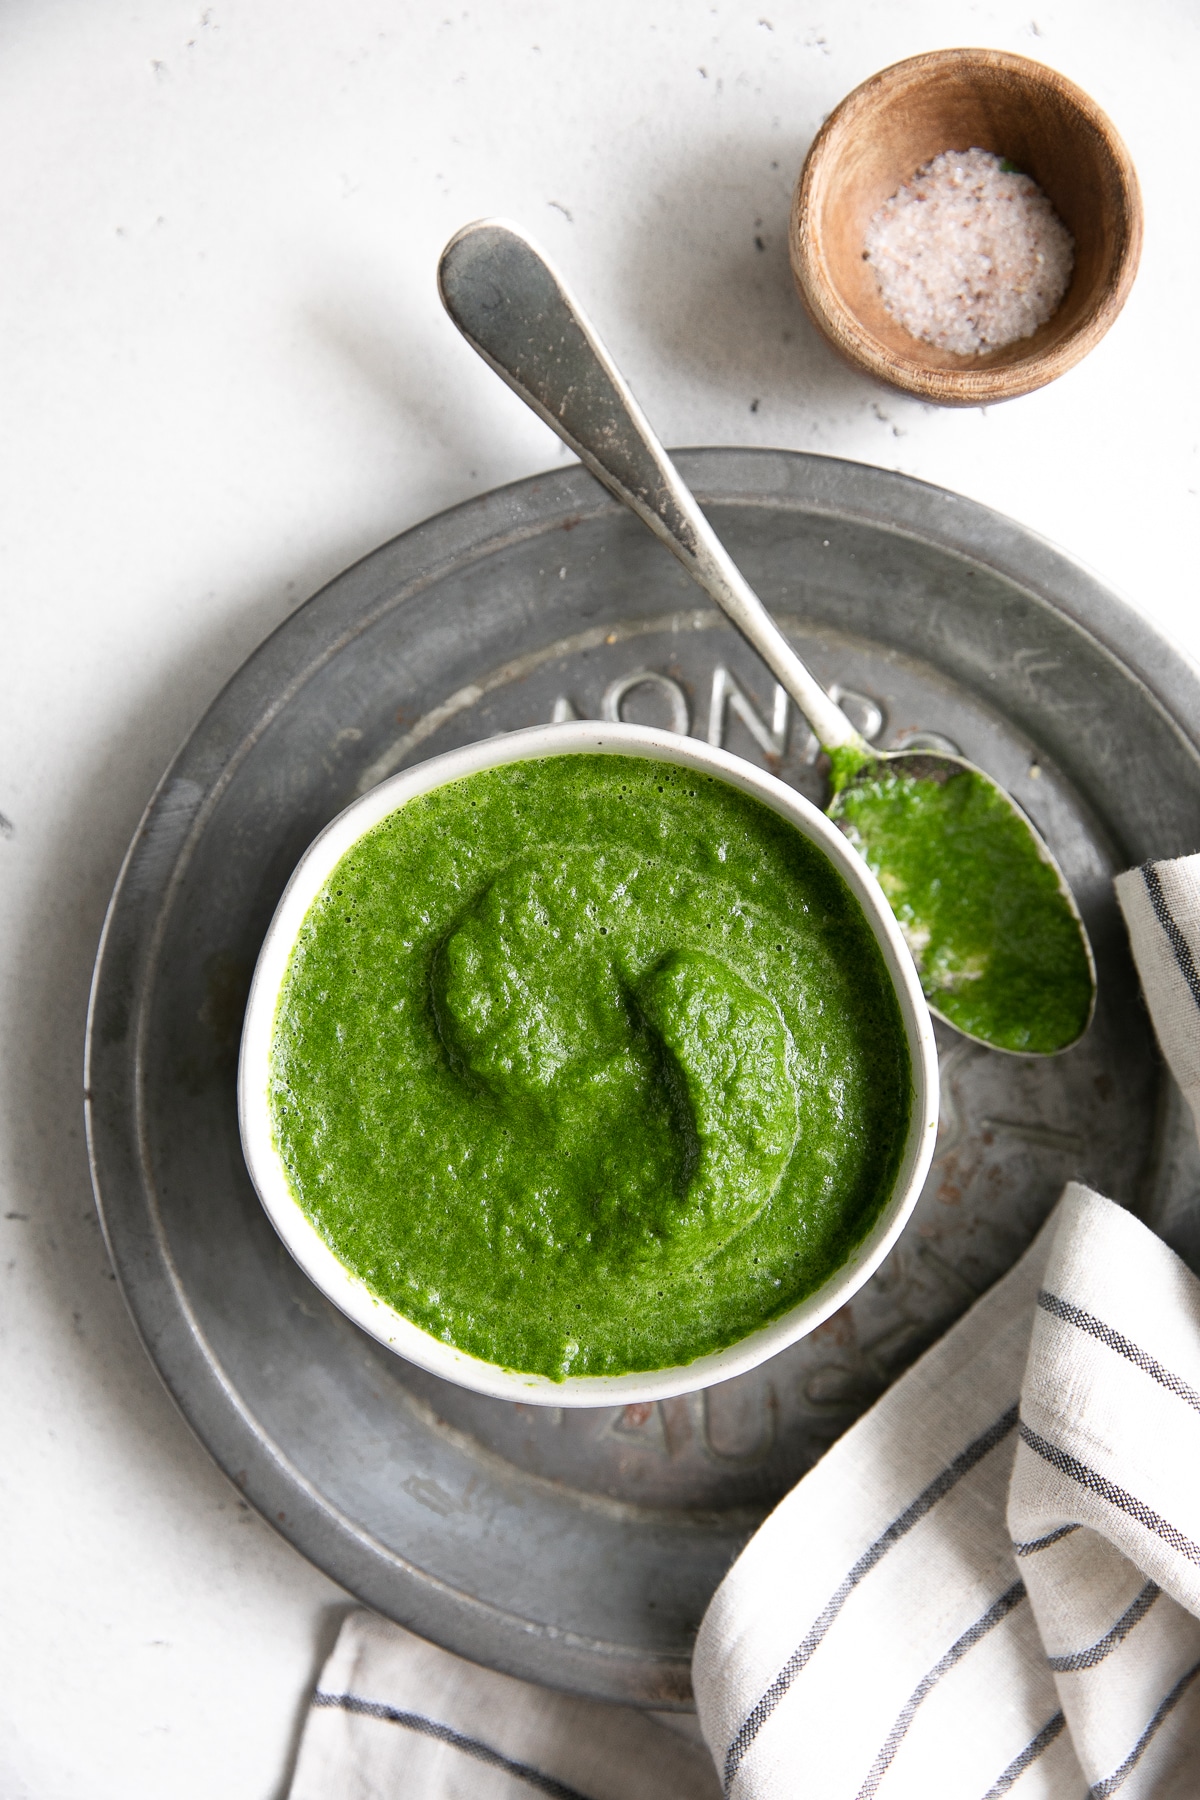 Use extra mint to make a delicious mint chutney to add to veggies, flatbreads, and grilled meats all summer with this recipe at The Forked Spoon